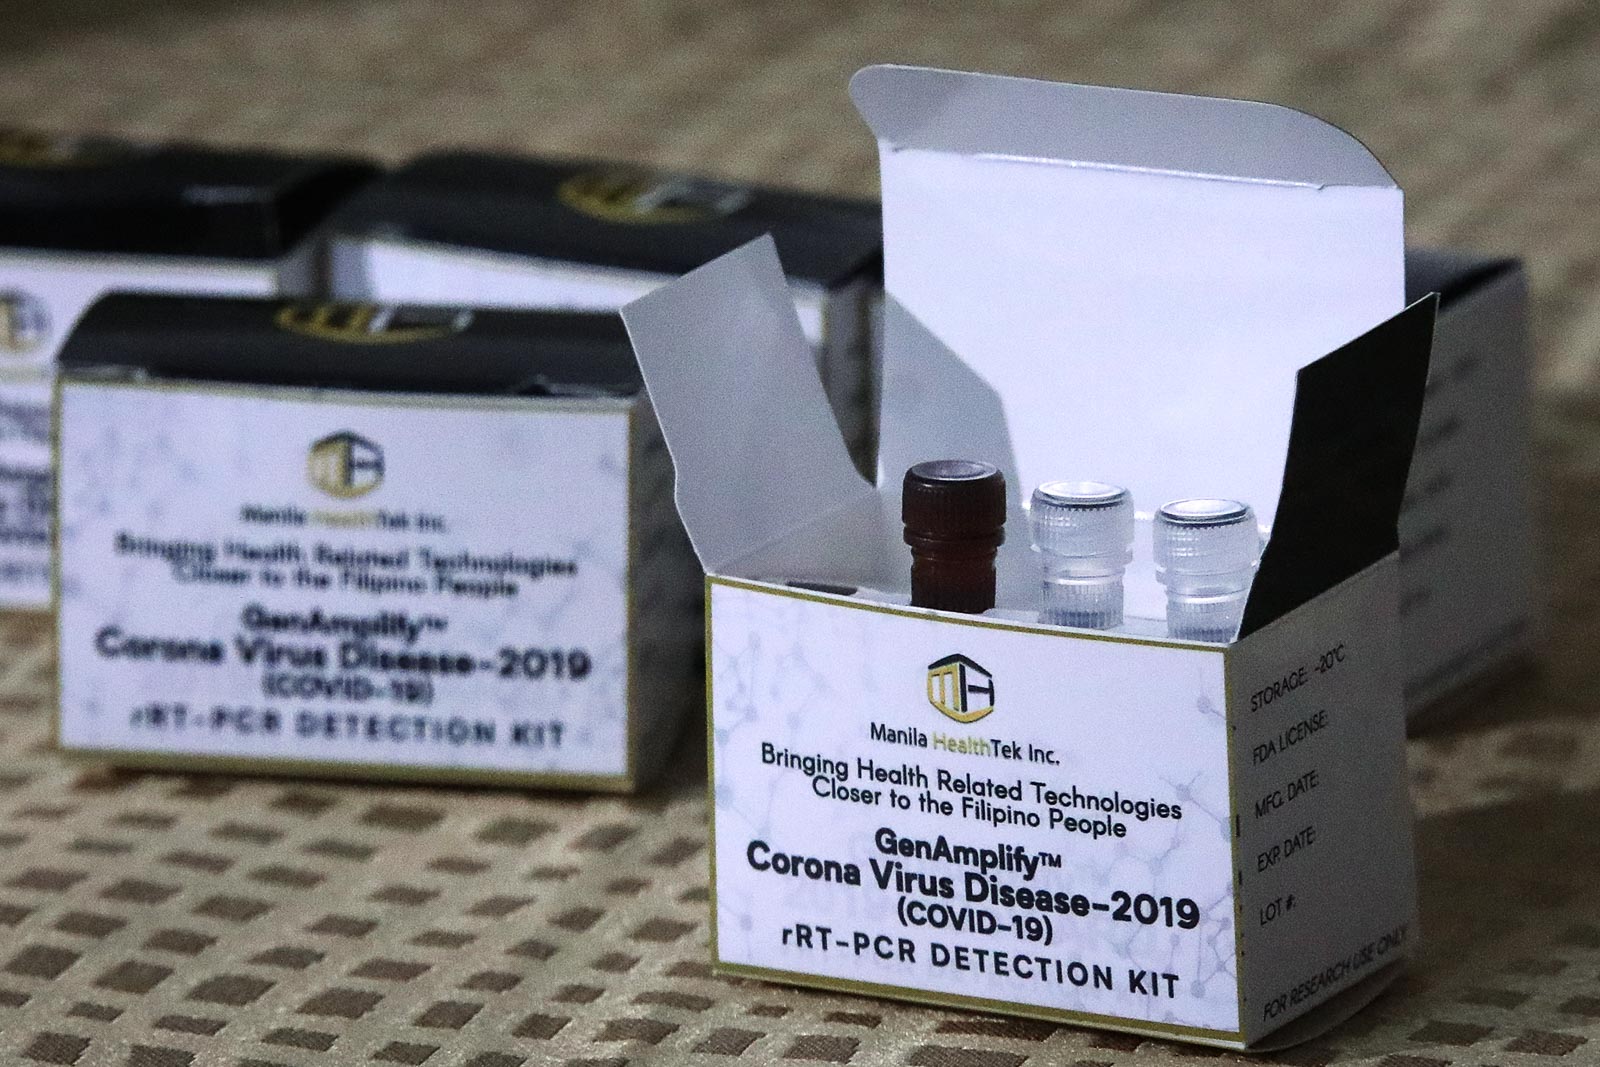 COVID-19 TEST KIT. A sample of the UP-developed novel coronavirus detection kit as presented to media during a press briefing held at the Philippine Gerome Center on March 12, 2020. Photo by Darren Langit/Rappler  